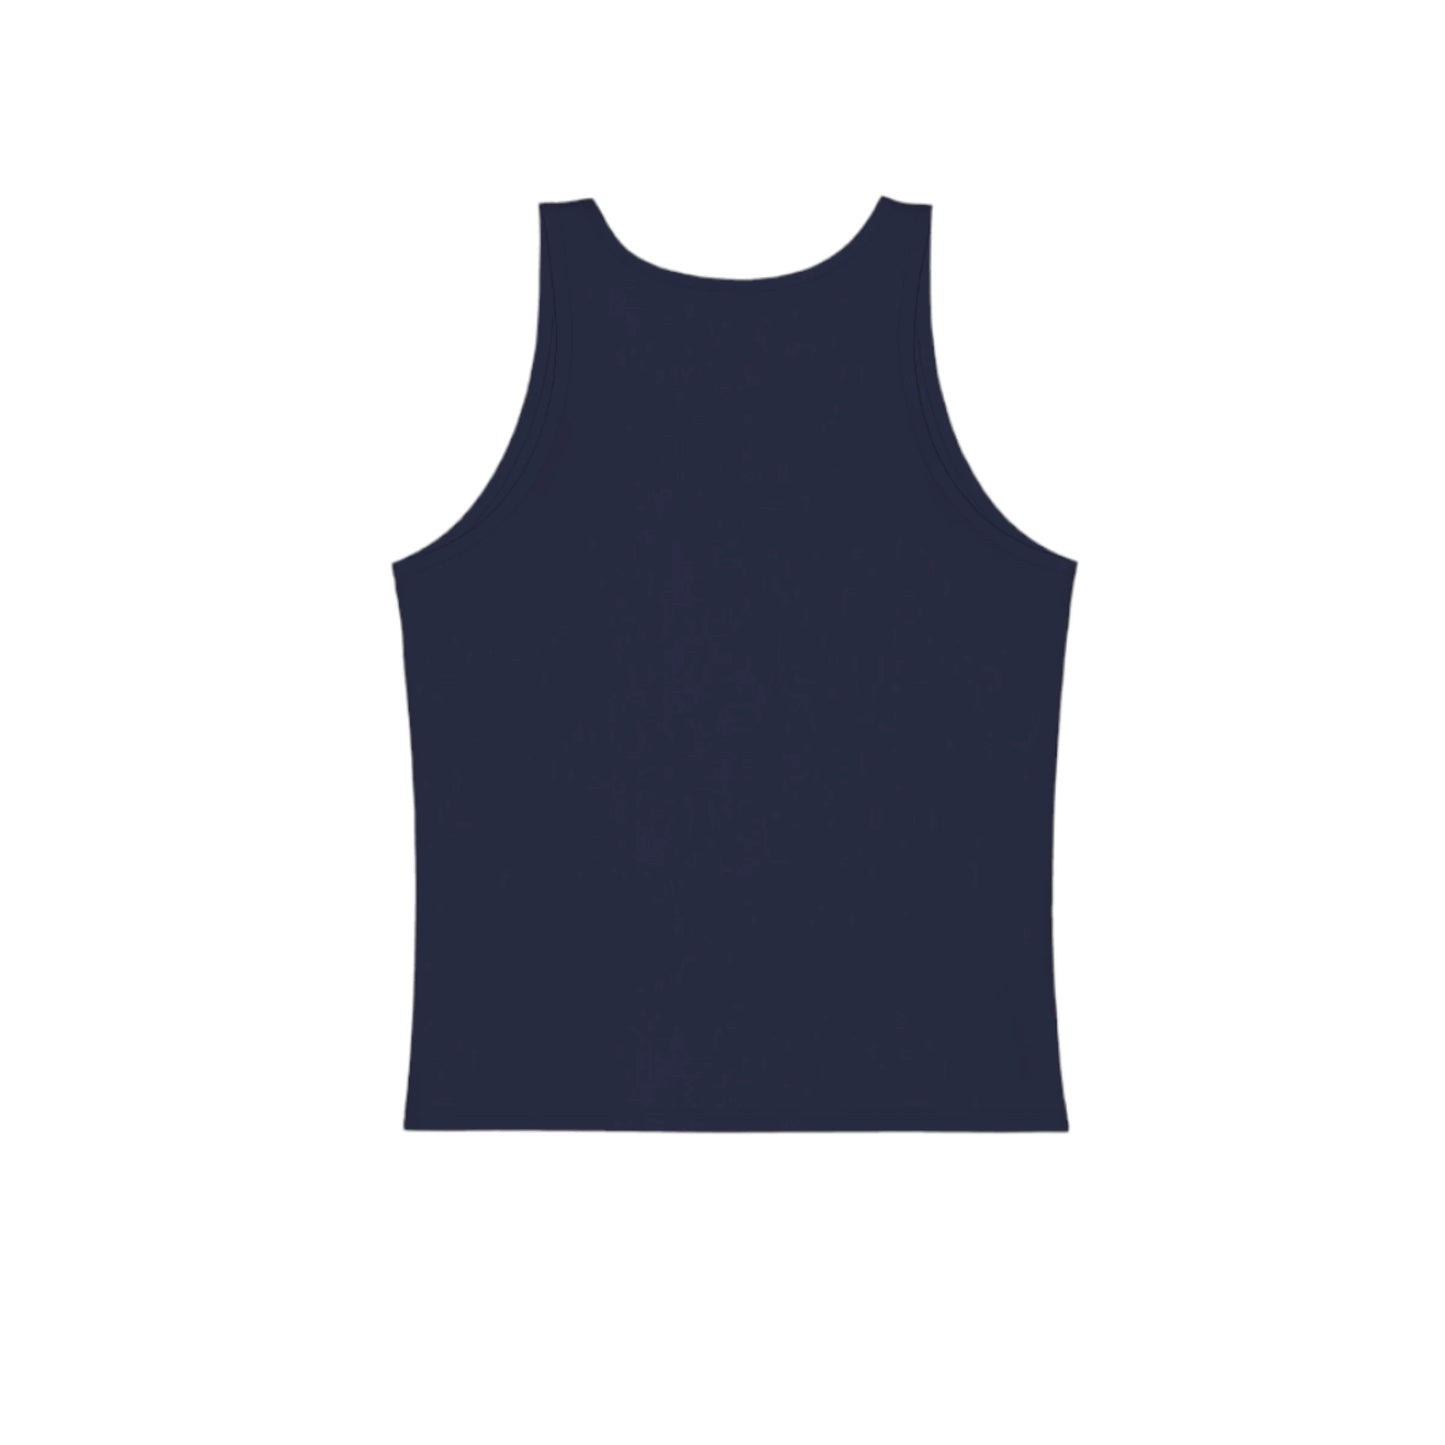 the back of the navy tank top